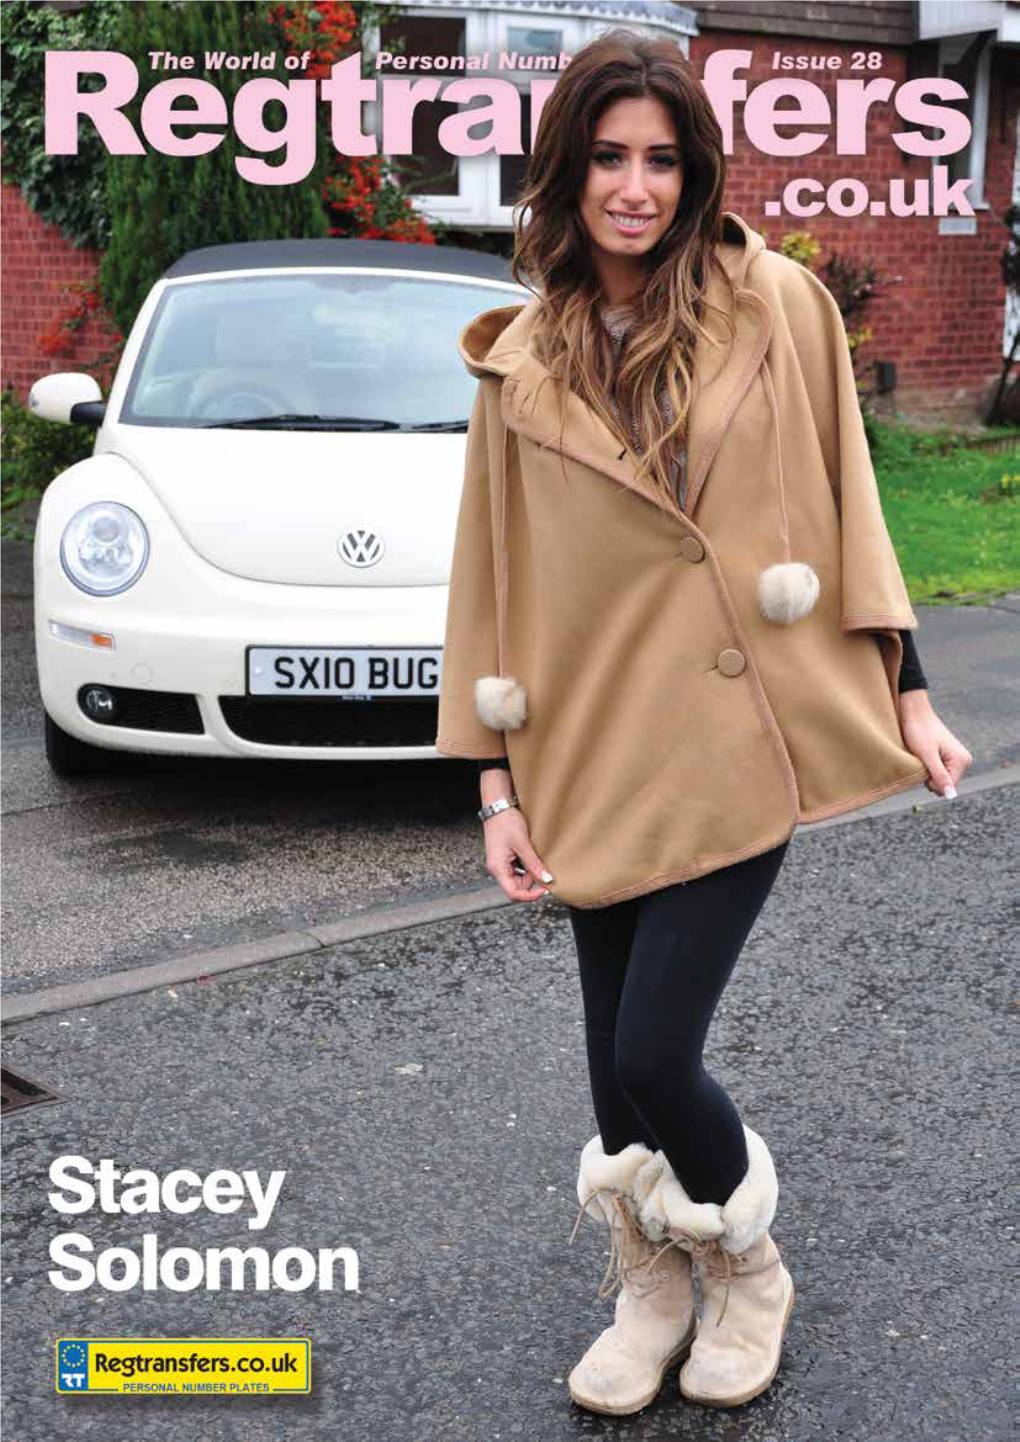 Issue 28 28 STACEY SOLOMON C1.Qxd 08/11/2011 09:43 Page 6 28 STACEY SOLOMON C1.Qxd 08/11/2011 09:44 Page 7